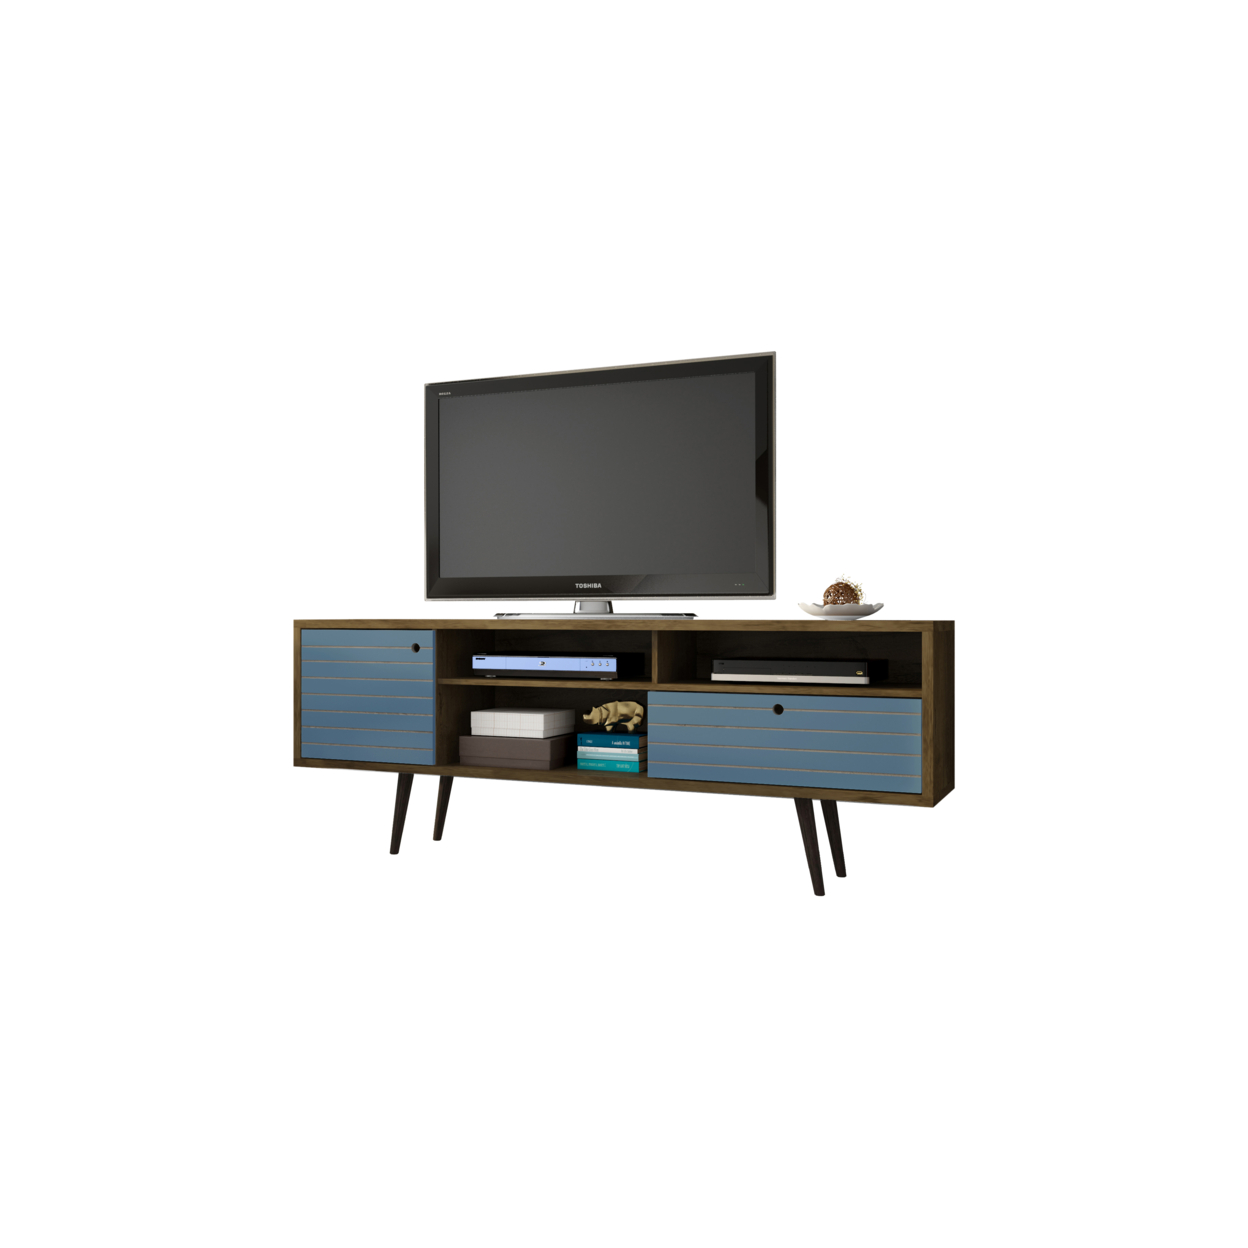 70.86" Mid Century - Modern TV Stand with 4 Shelving Spaces and 1 Drawer